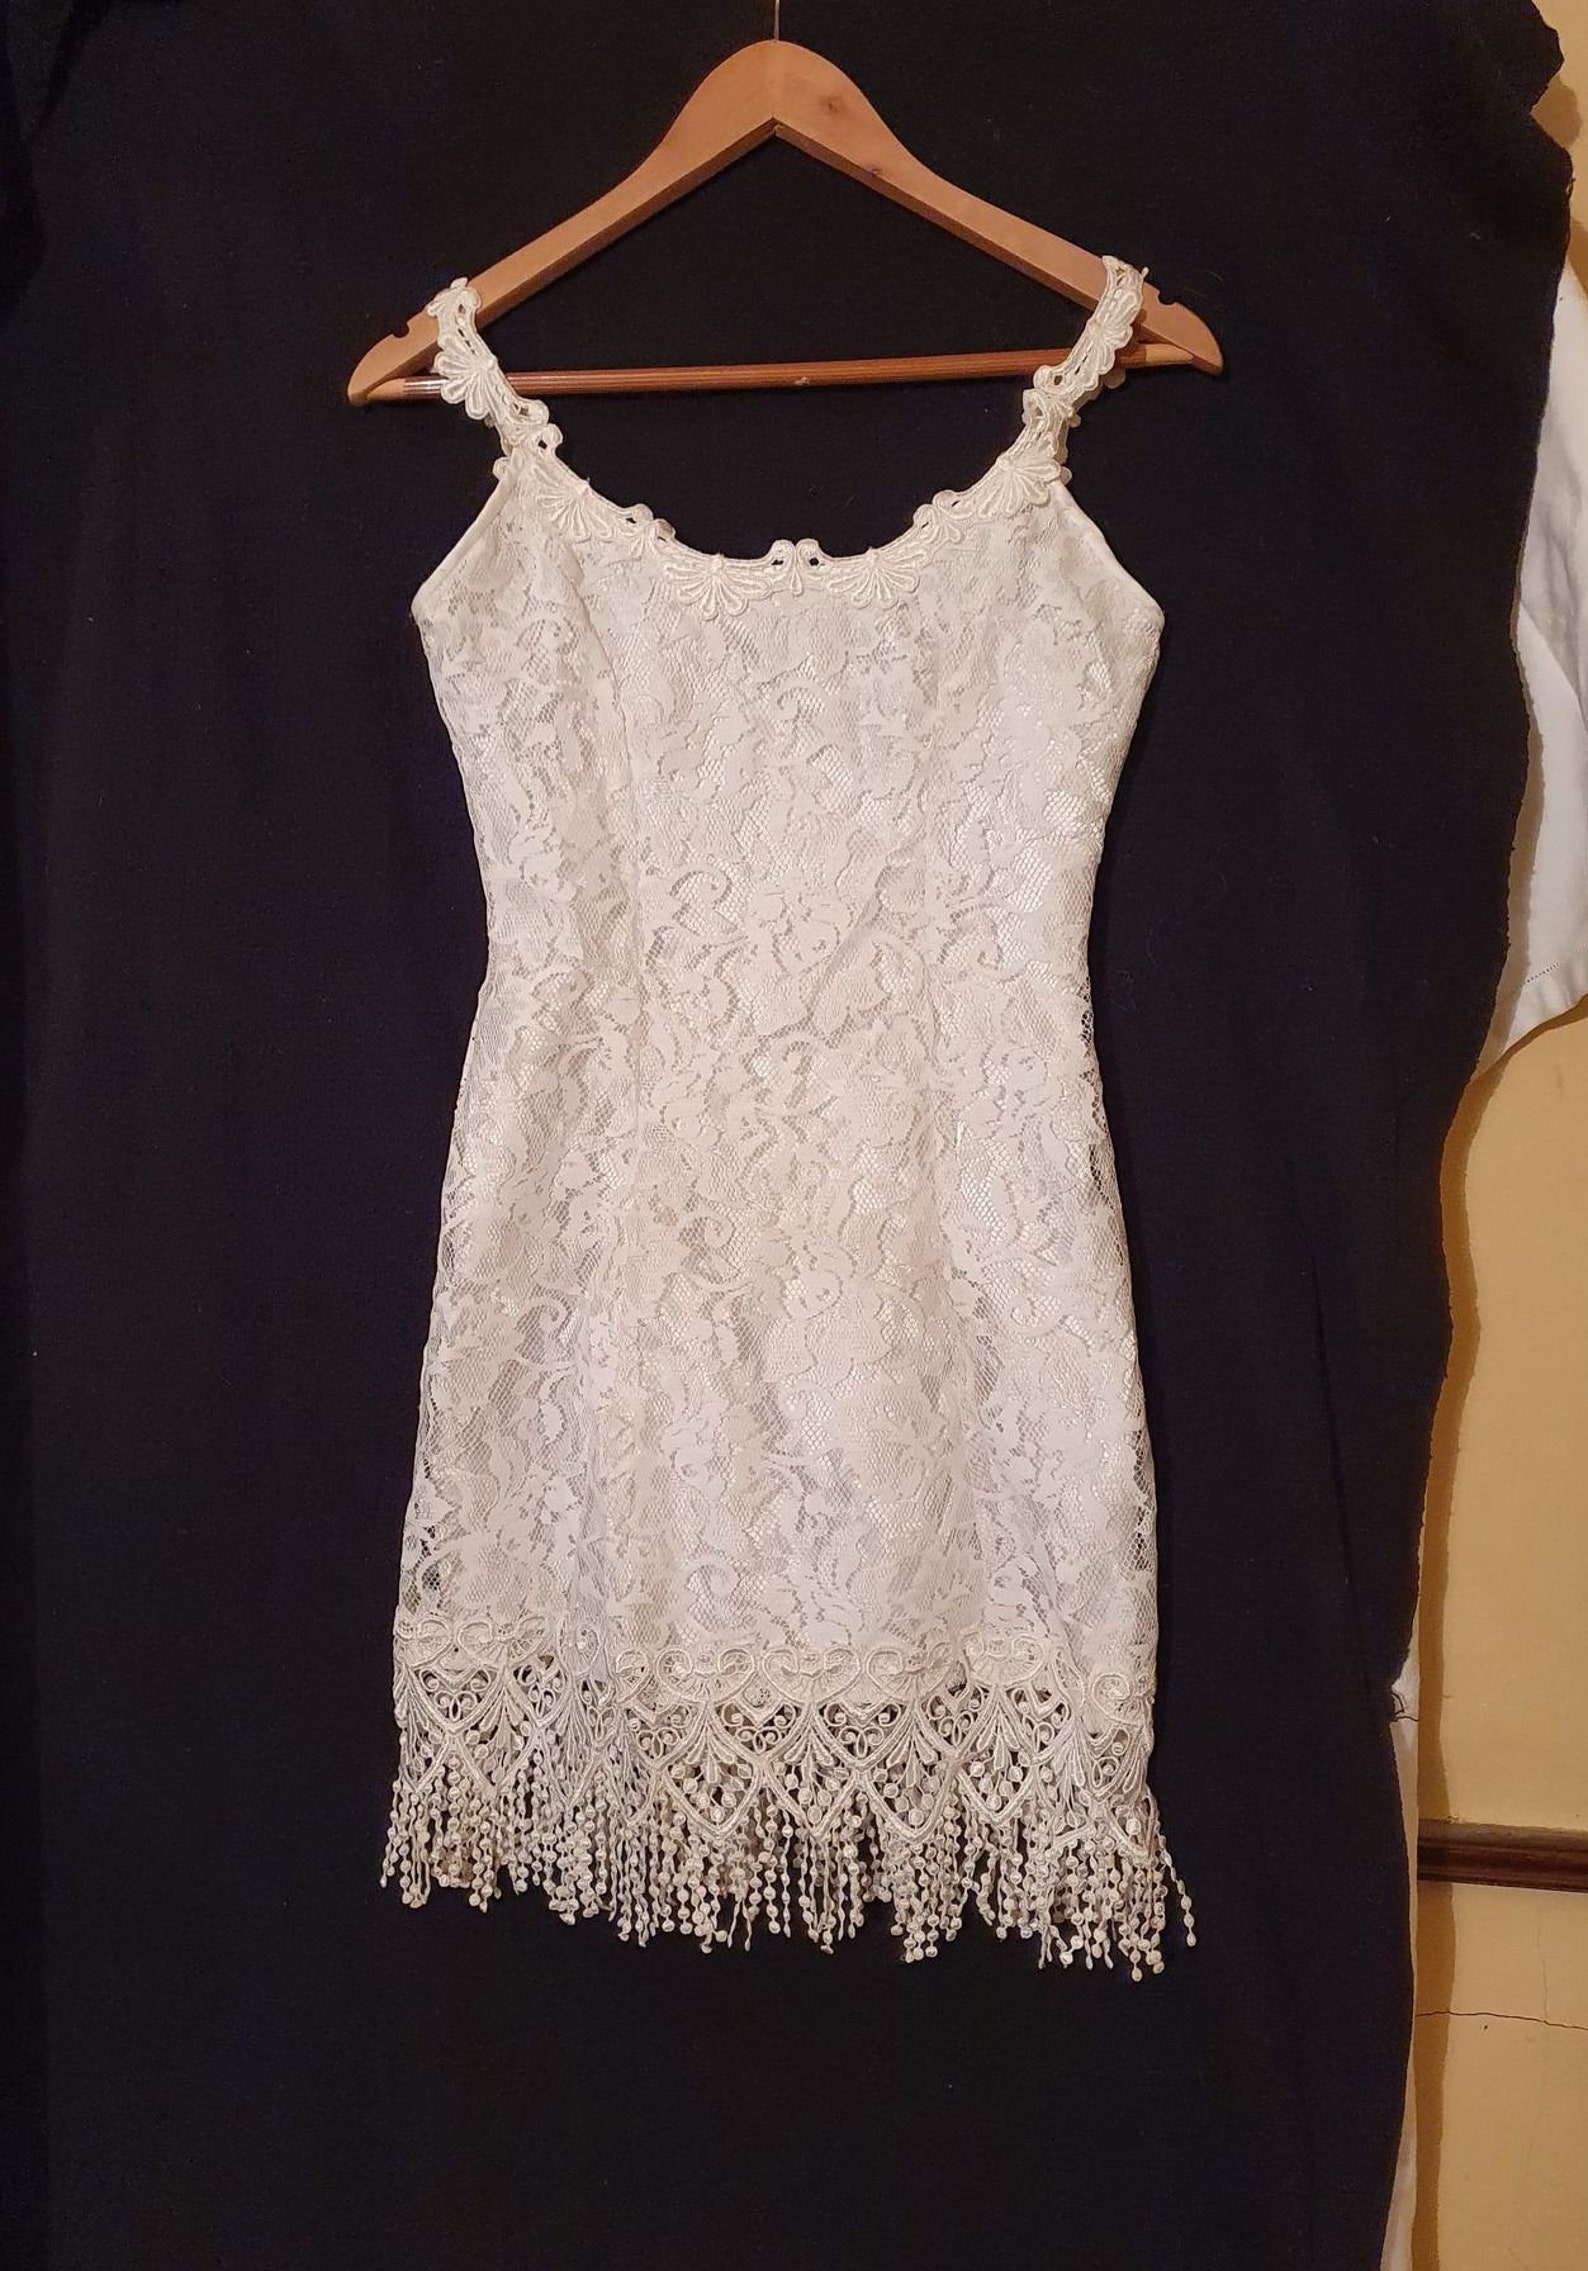 Vintage White Lace Mid Thigh Dress with contrasting lace trim | Etsy